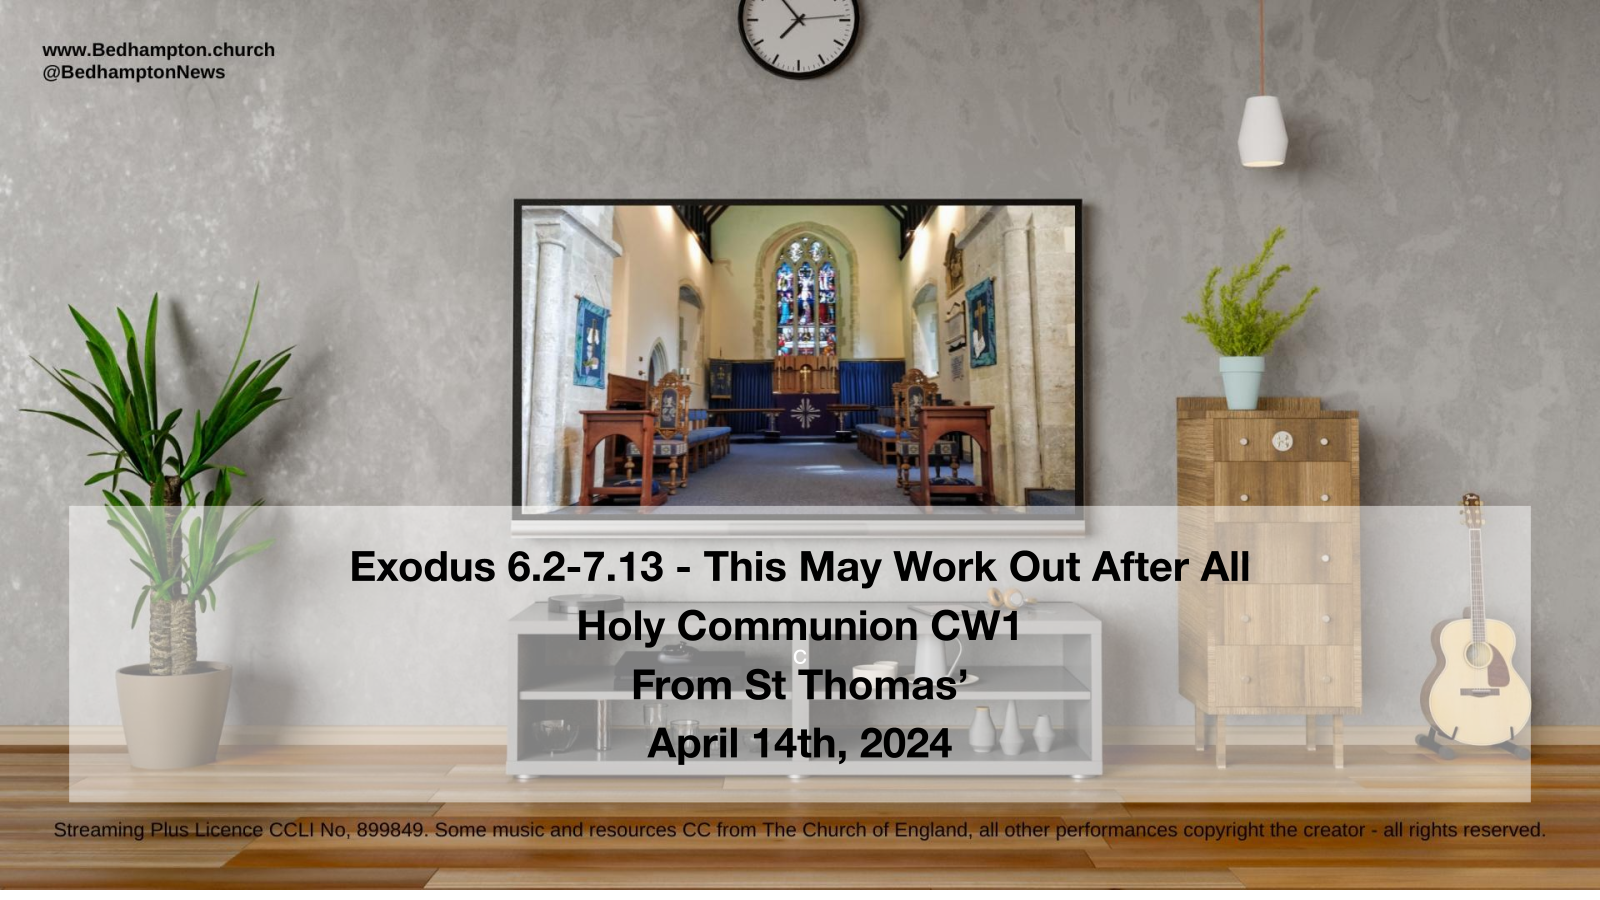 Holy Communion CW1 April 14th, 2024 – Exodus 6.2-7.13 – This May Work Out After All